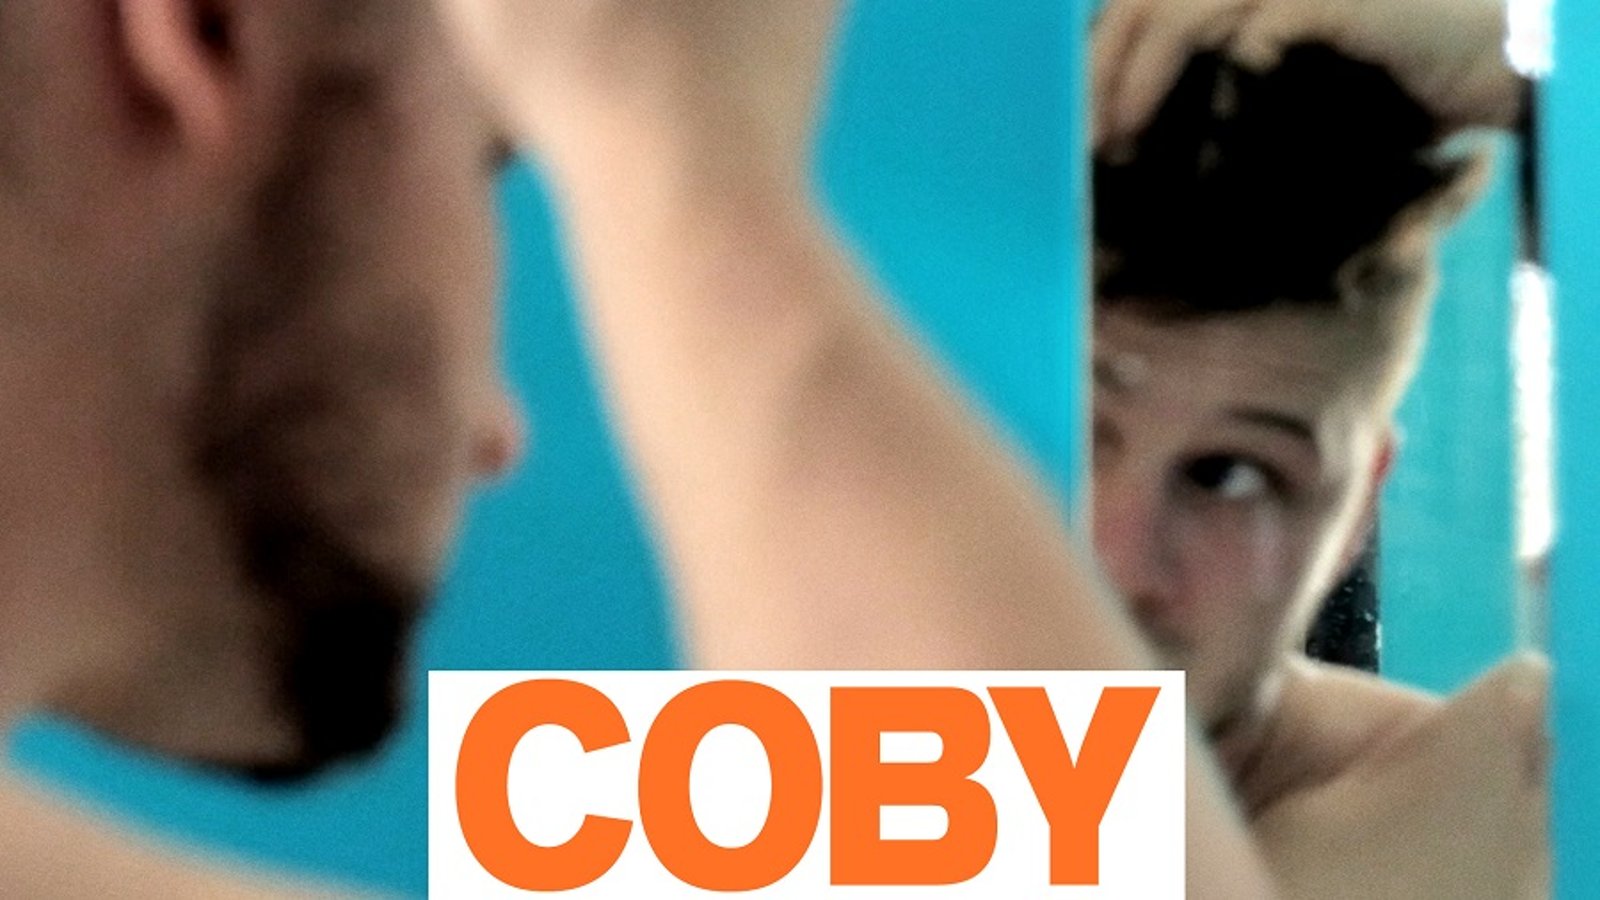 Coby - A Personal Tale of Gender Transition in the American Midwest